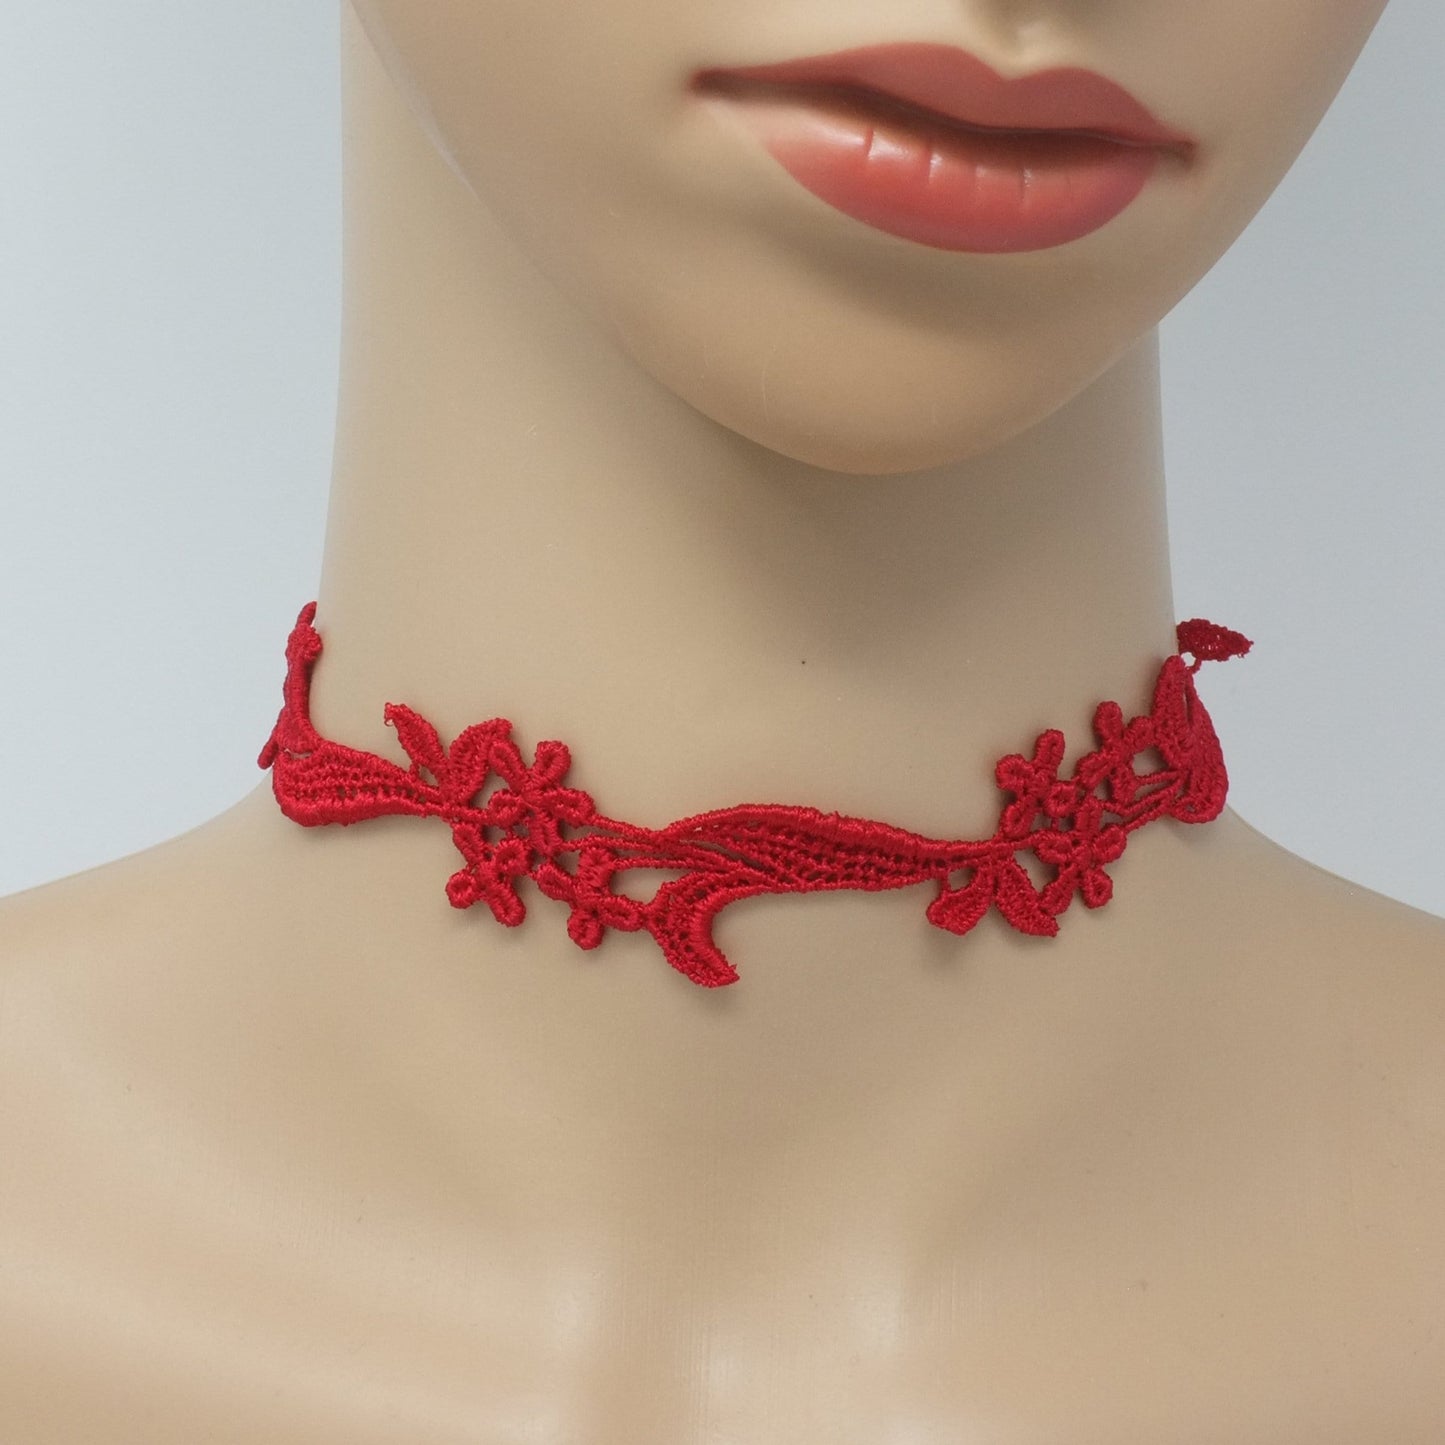 Classy Choker Necklace made with red floral lace.